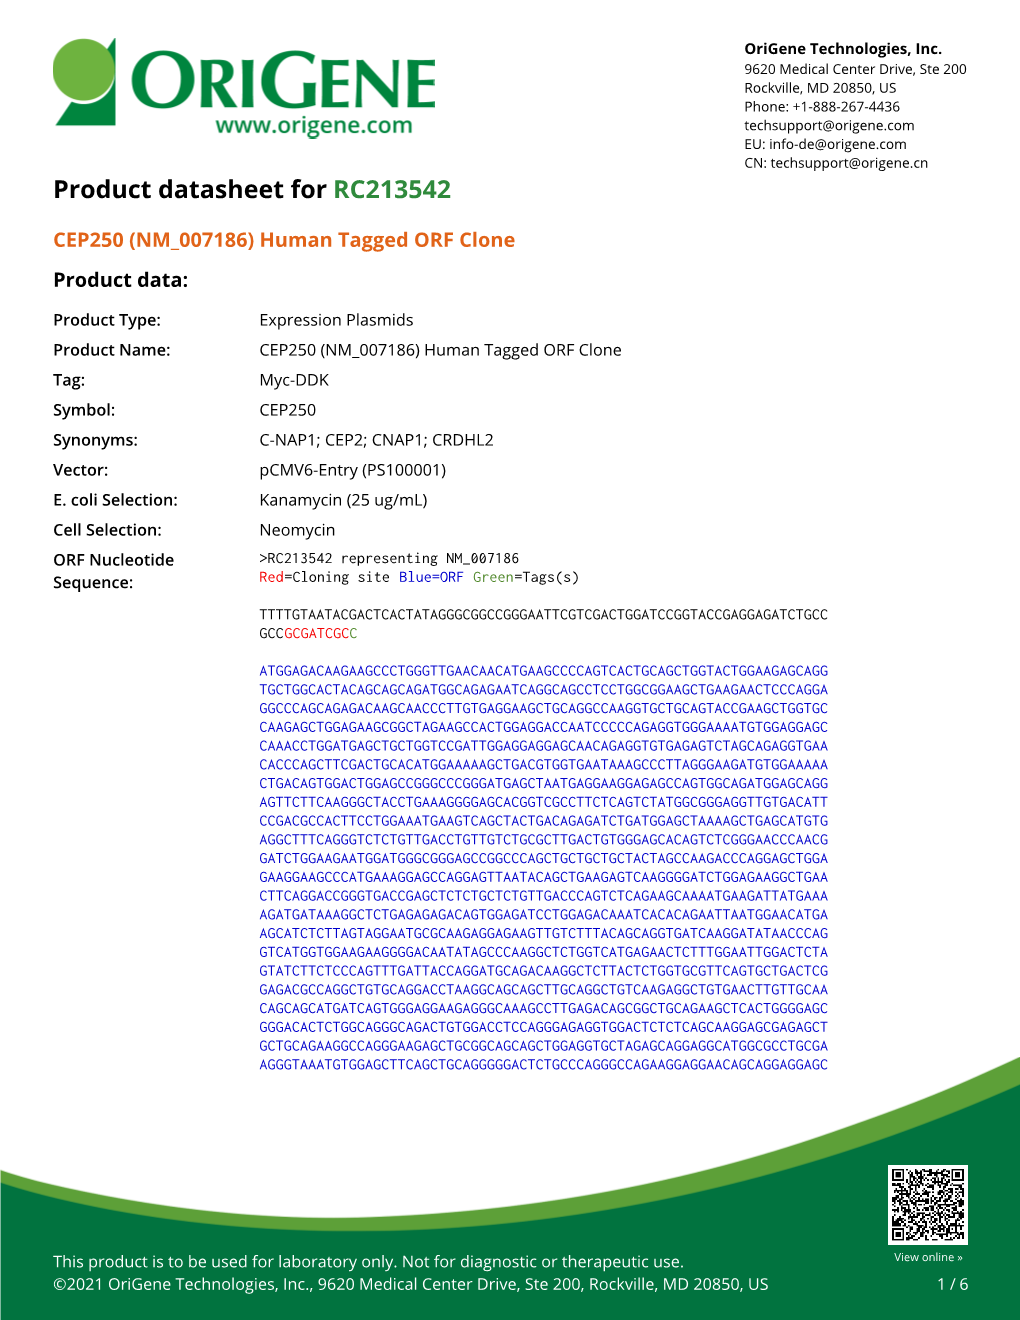 CEP250 (NM 007186) Human Tagged ORF Clone Product Data